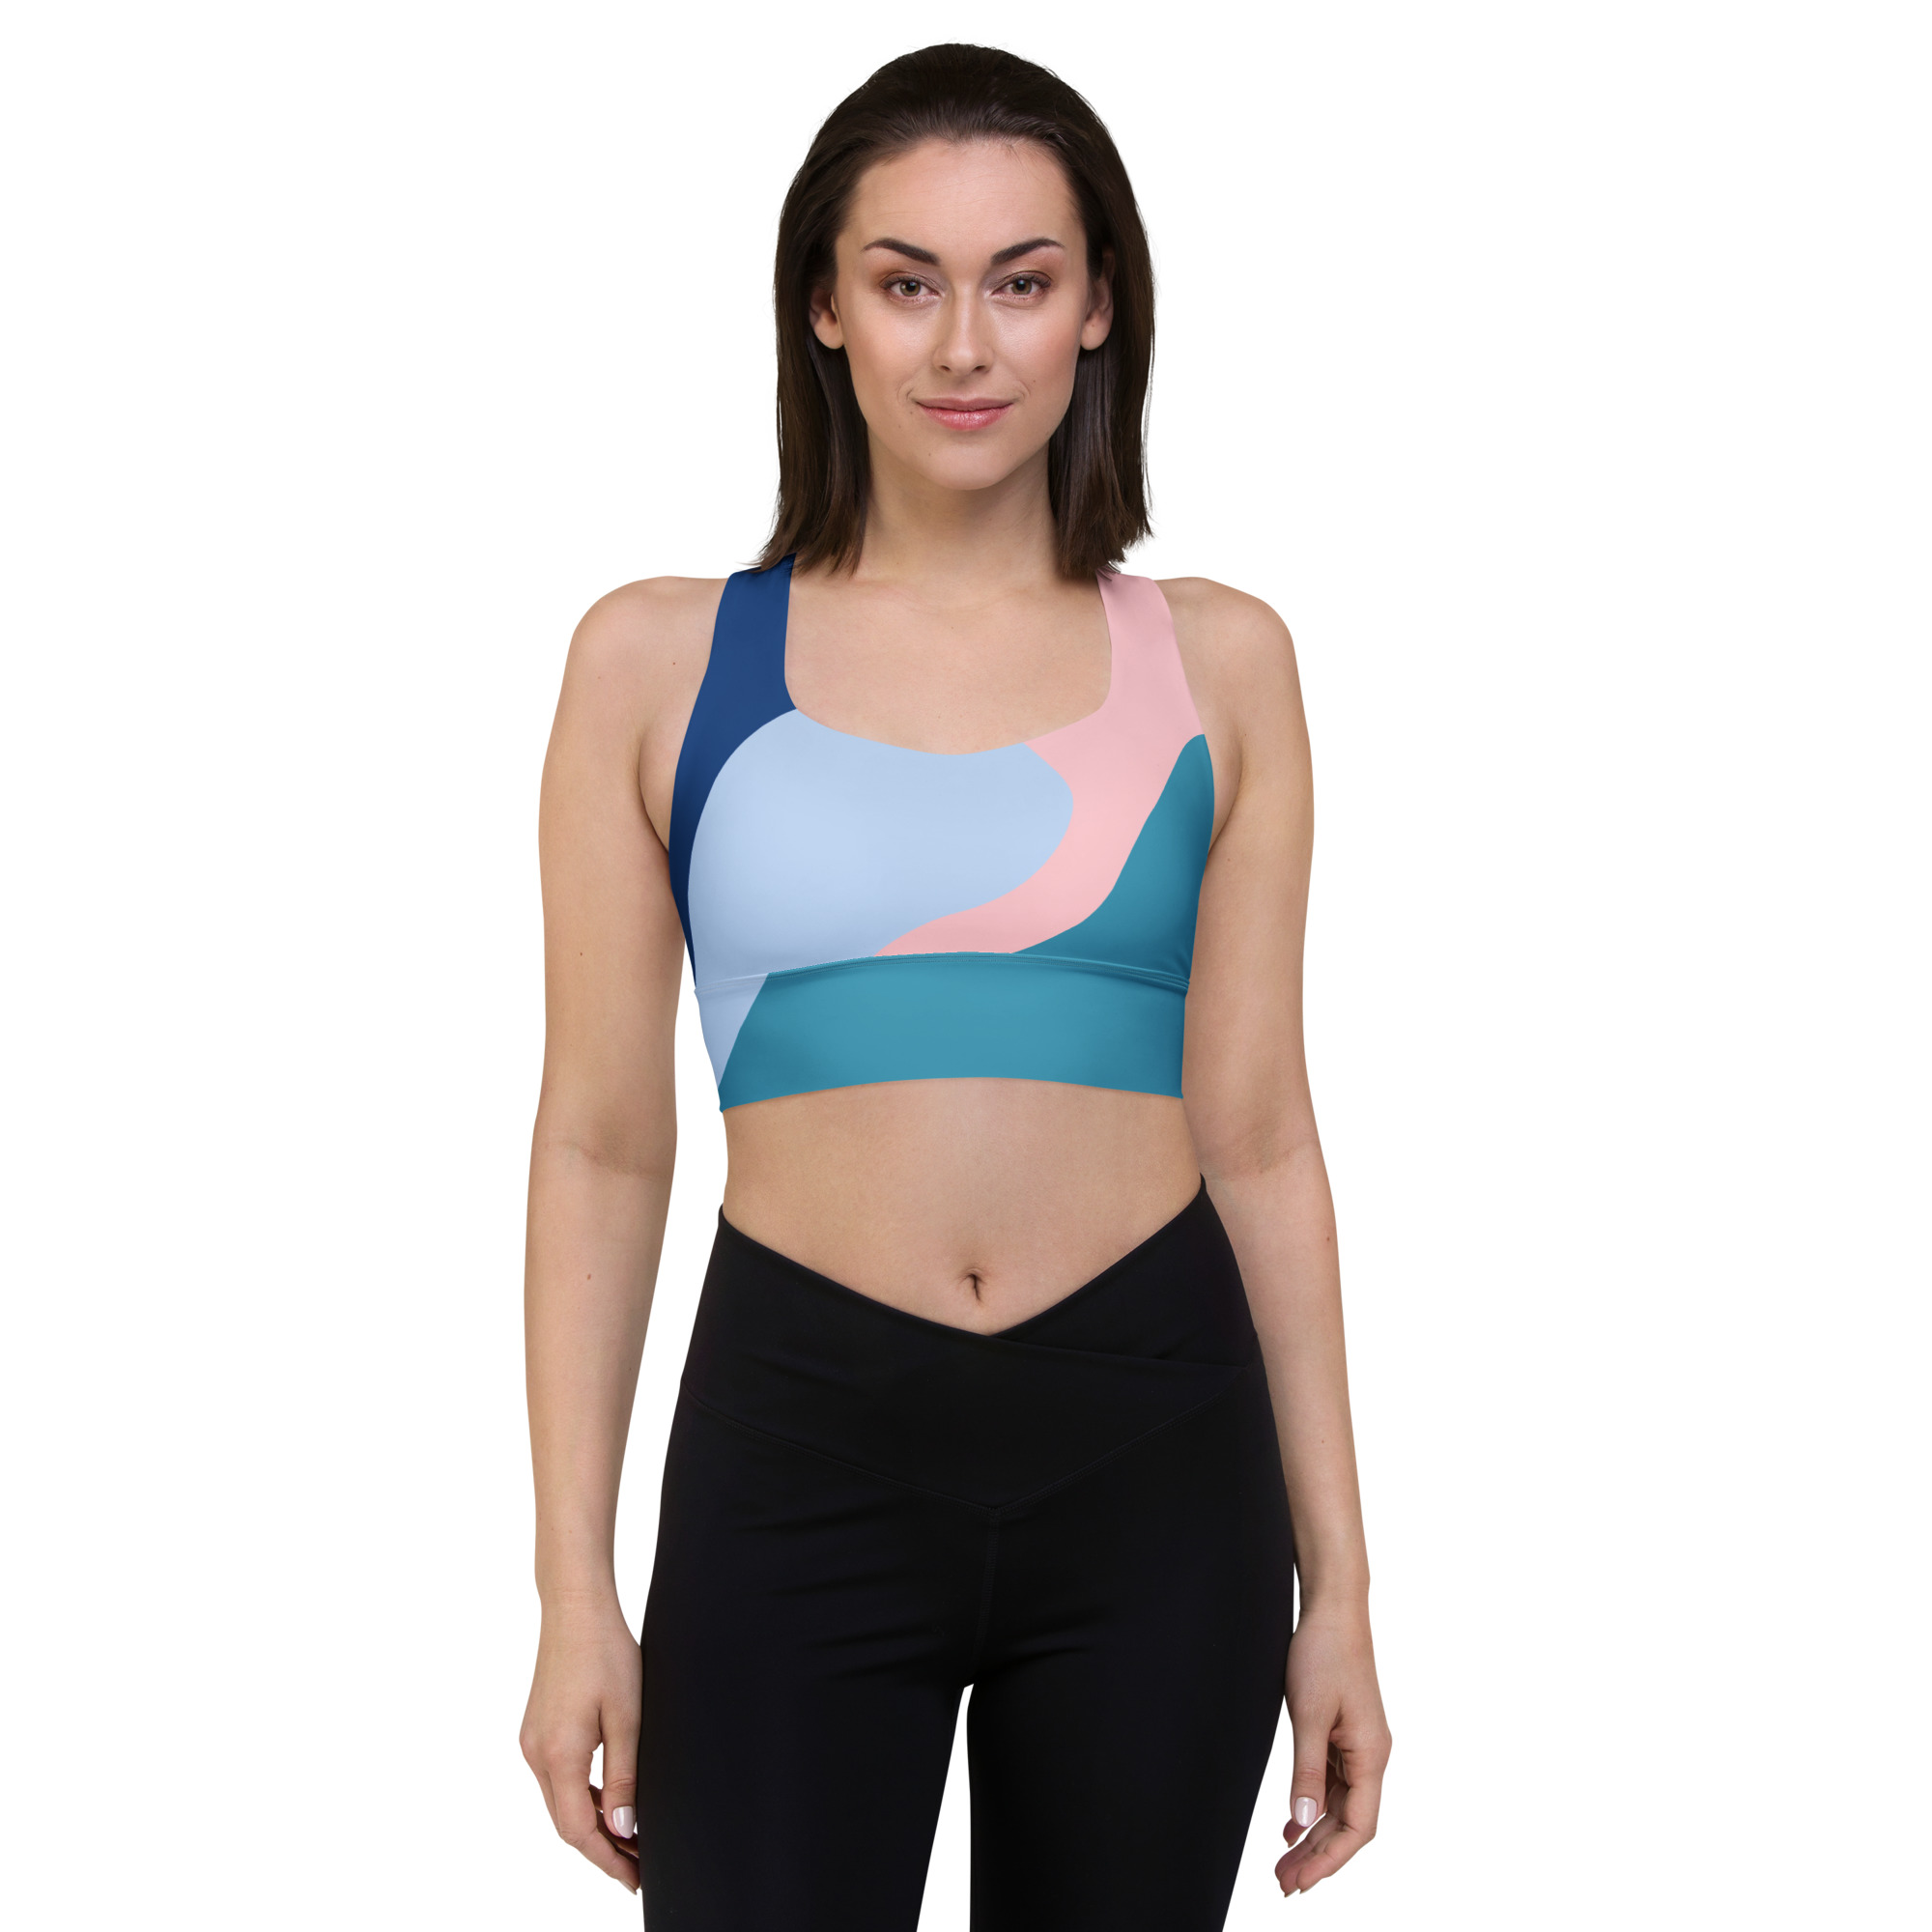 https://www.essentiallysavvy.com/wp-content/uploads/2022/05/all-over-print-longline-sports-bra-white-front-629022b54cfd0.jpg